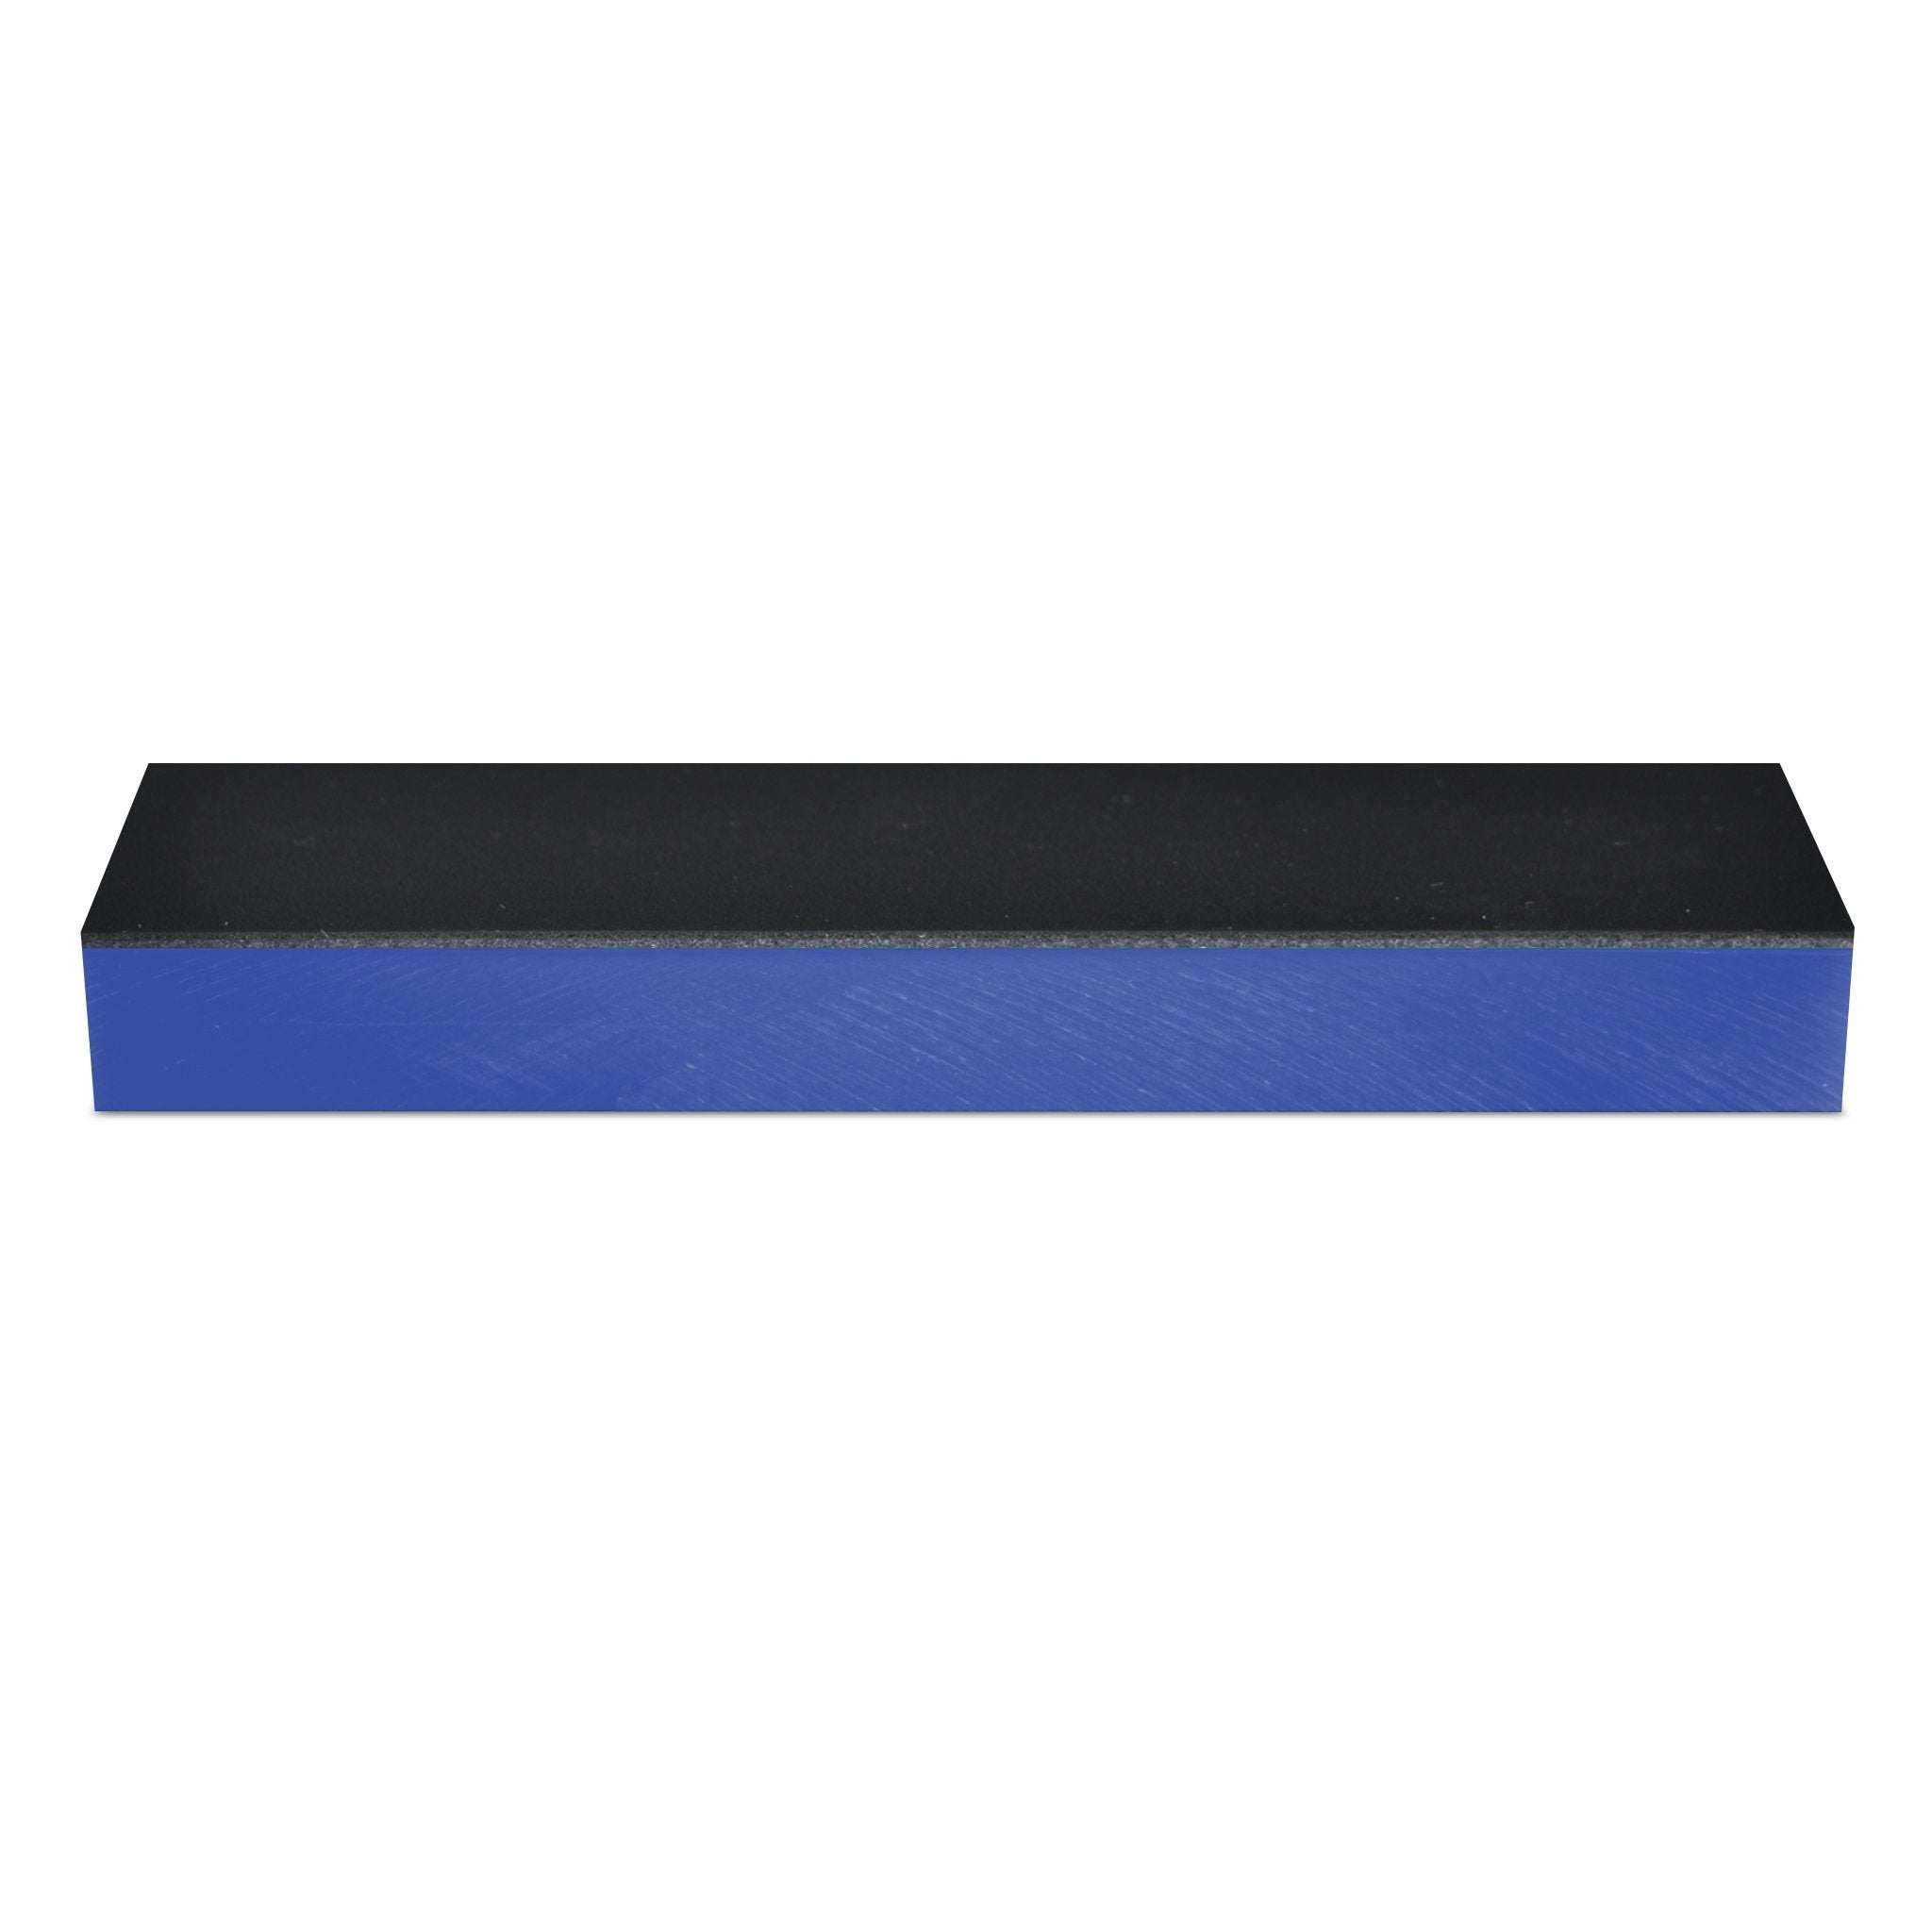 212 x 70 Jende Nano Cloth Strop Progression Kit coloured perspex with strop material on top